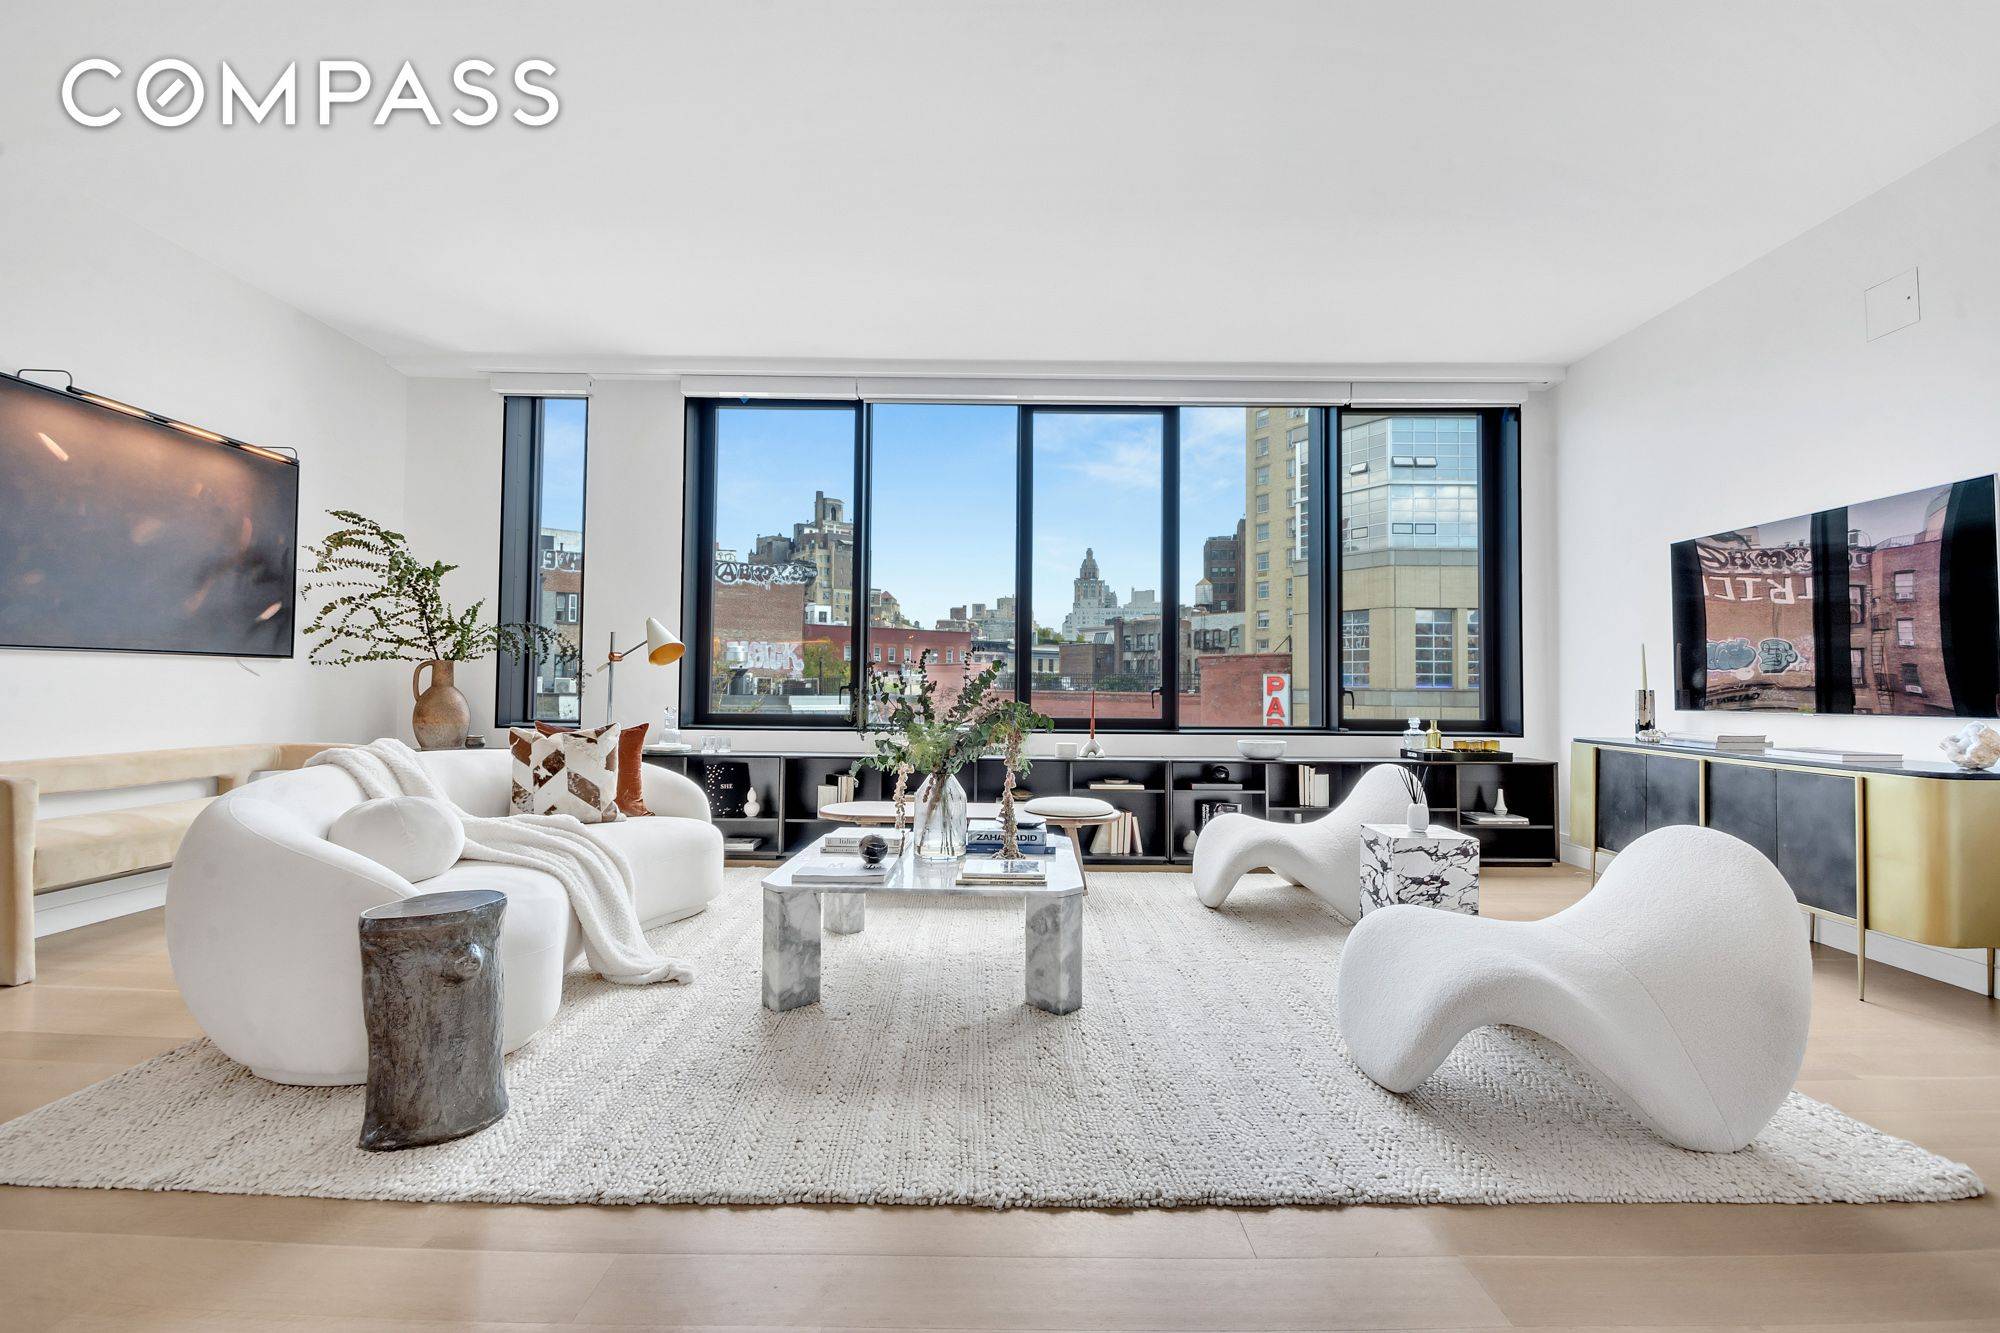 175 West 10th 4 is a stunning full floor through modern and luxurious home, encompassing the magical West Village charm.